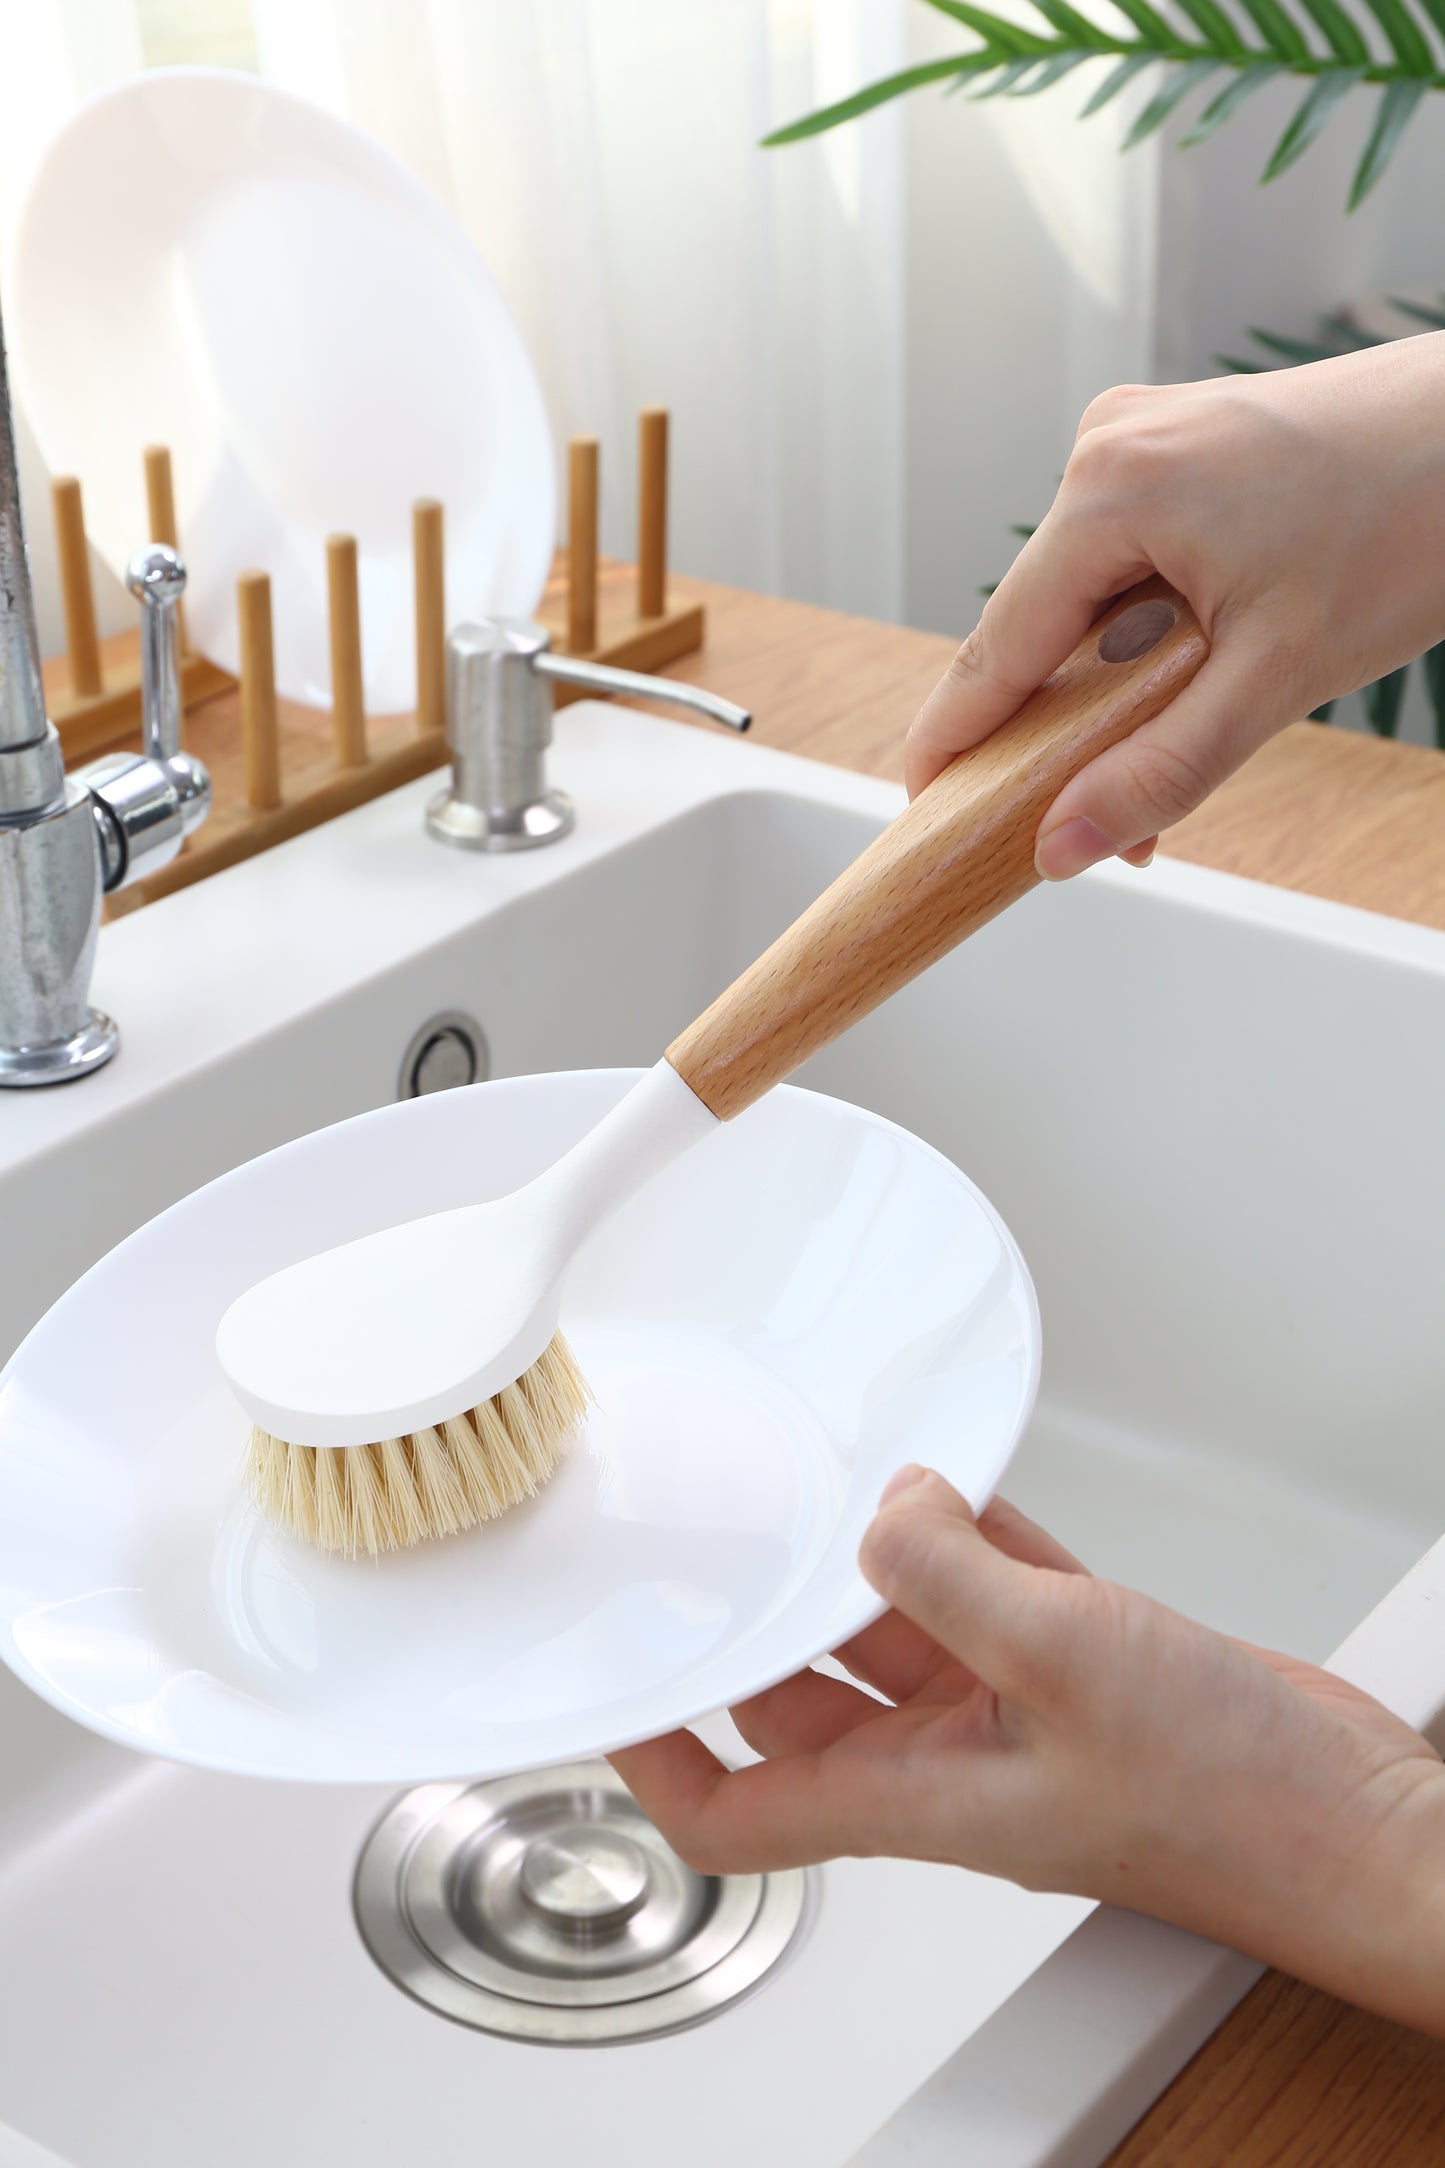 Sisal Dish Cleaning Brush with Bamboo Handle Dish Scrubber, Scrub Brush for Pans, Pots, Dishwashing and Cleaning Brushes (Square Brush, Round Brush and Short Brush)